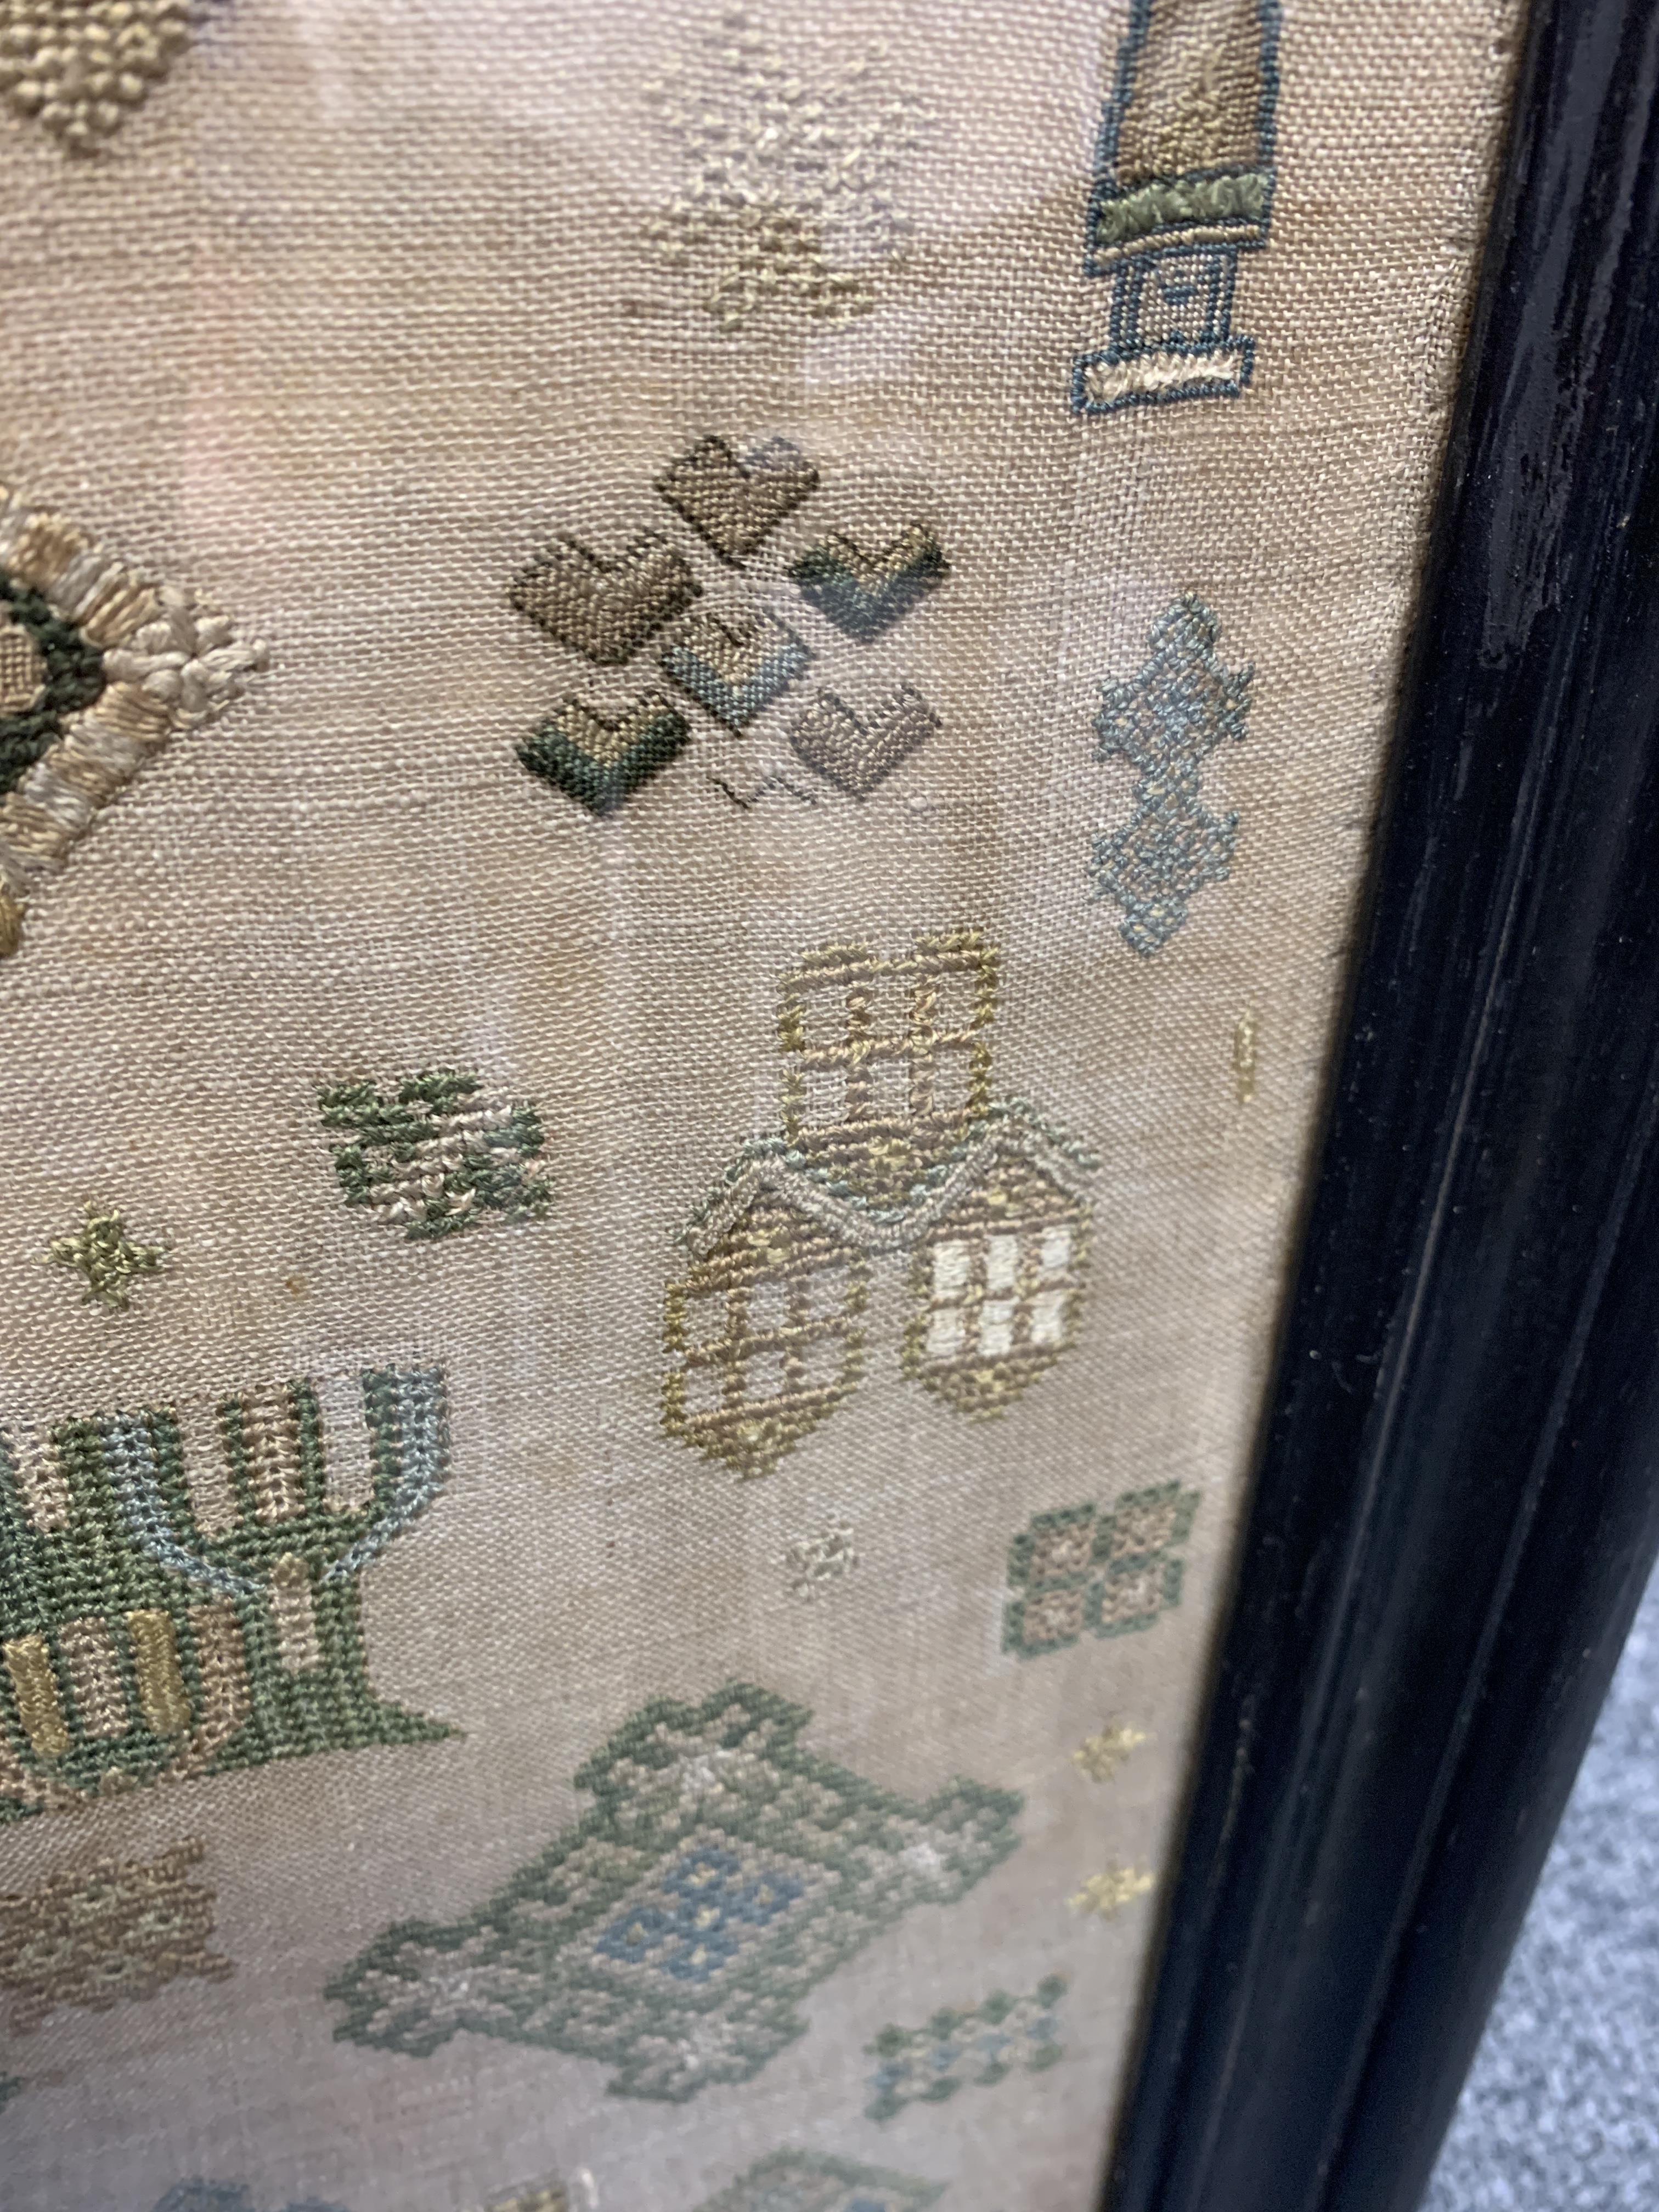 A RARE NEEDLEWORK SPOT SAMPLER BY GRACE THRUSTON, MID-17TH CENTURY worked with polychrome silks on - Image 9 of 15